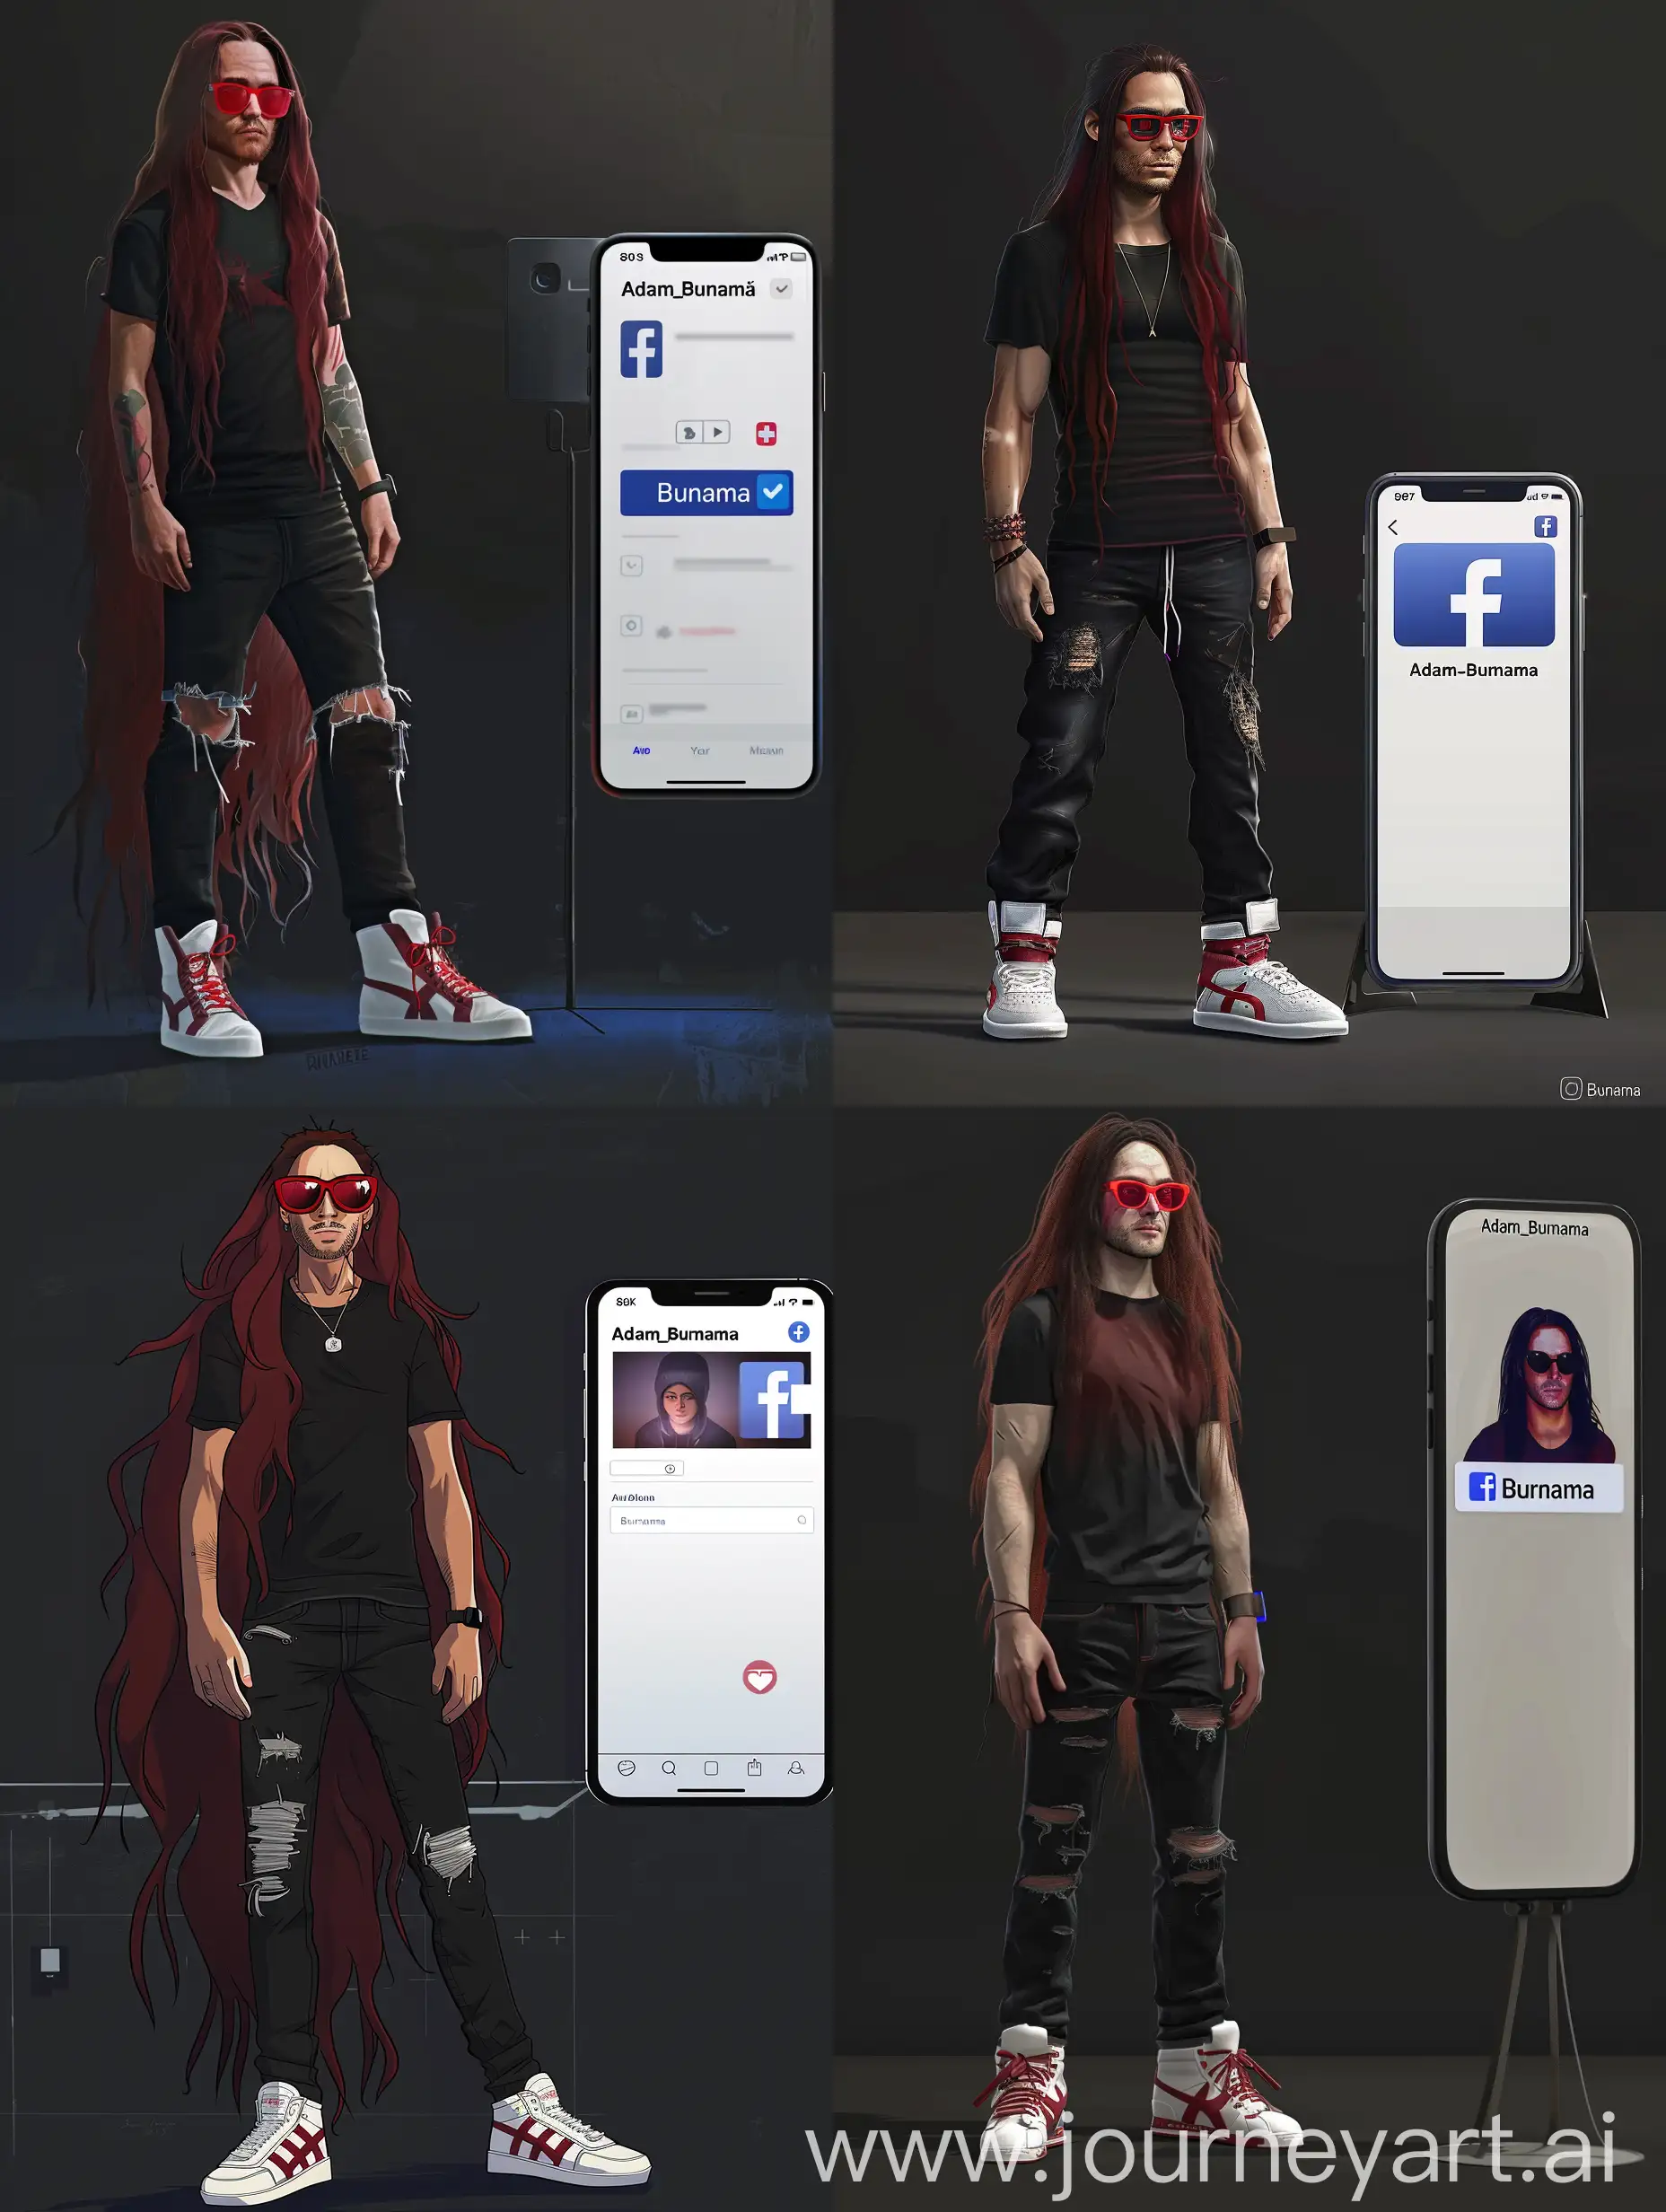 a man is standing against a dark background and this character has very long maroon hair, red glasses, a black t-shirt, black jeans, and white onitsuka boots, . to the right of the character, there is a large smartphone displaying a white Facebook profile with the username “Adam_Burnama” and a blue check symbol, which may indicate that the account is verified or popular. 8K-UHD. Very Realistic